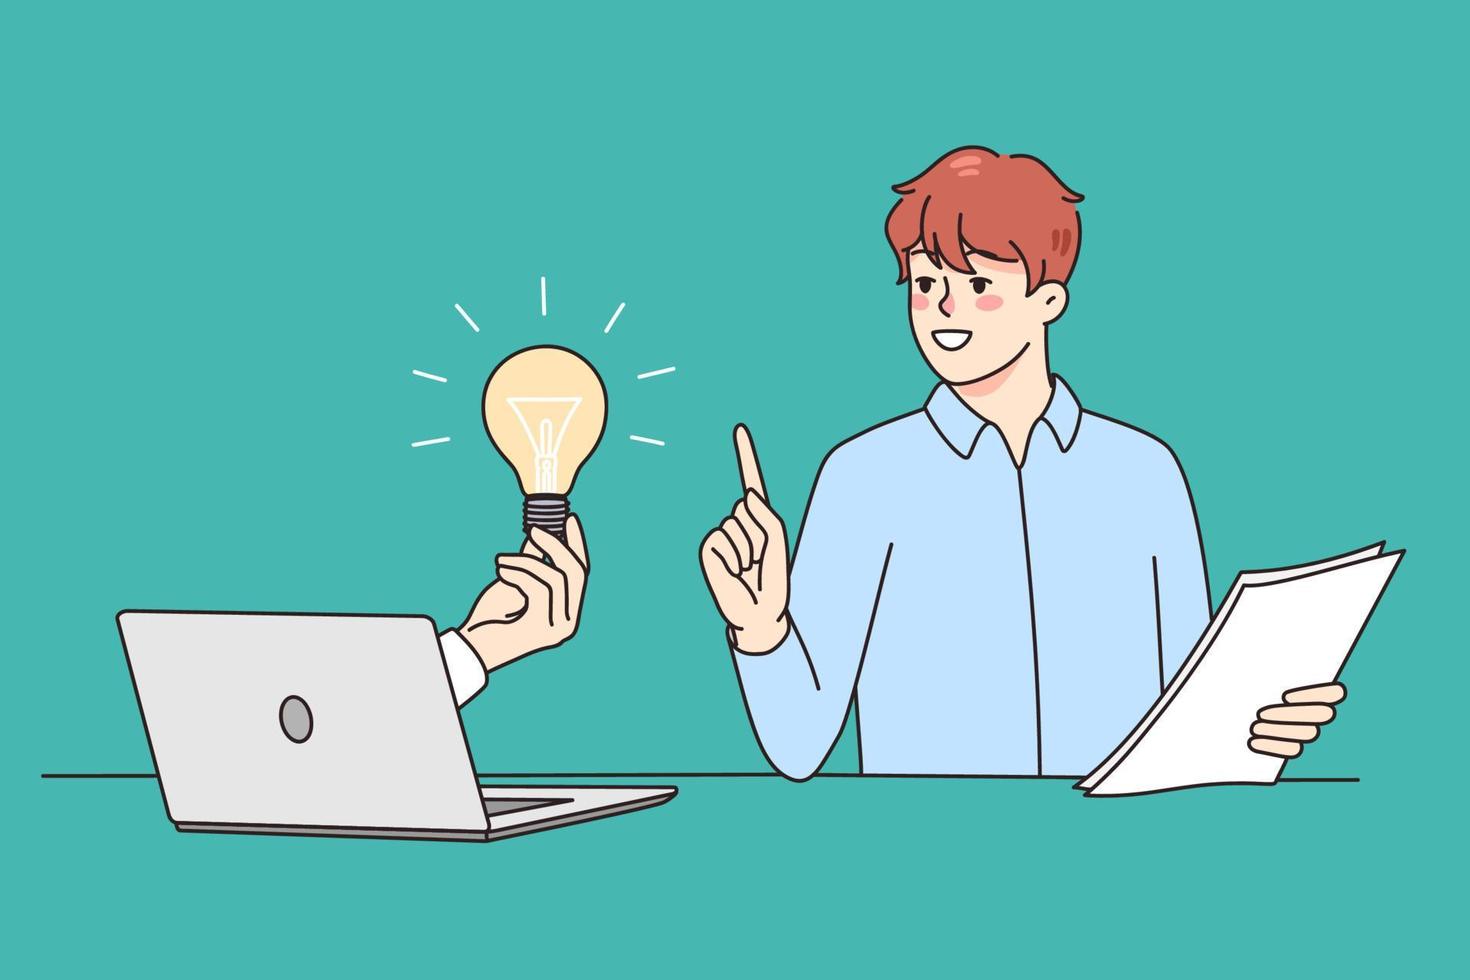 Hand from computer hold lightbulb offer innovative business idea to excited businessman. Young male employee get help from laptop. Innovation and creative thinking. Vector illustration.